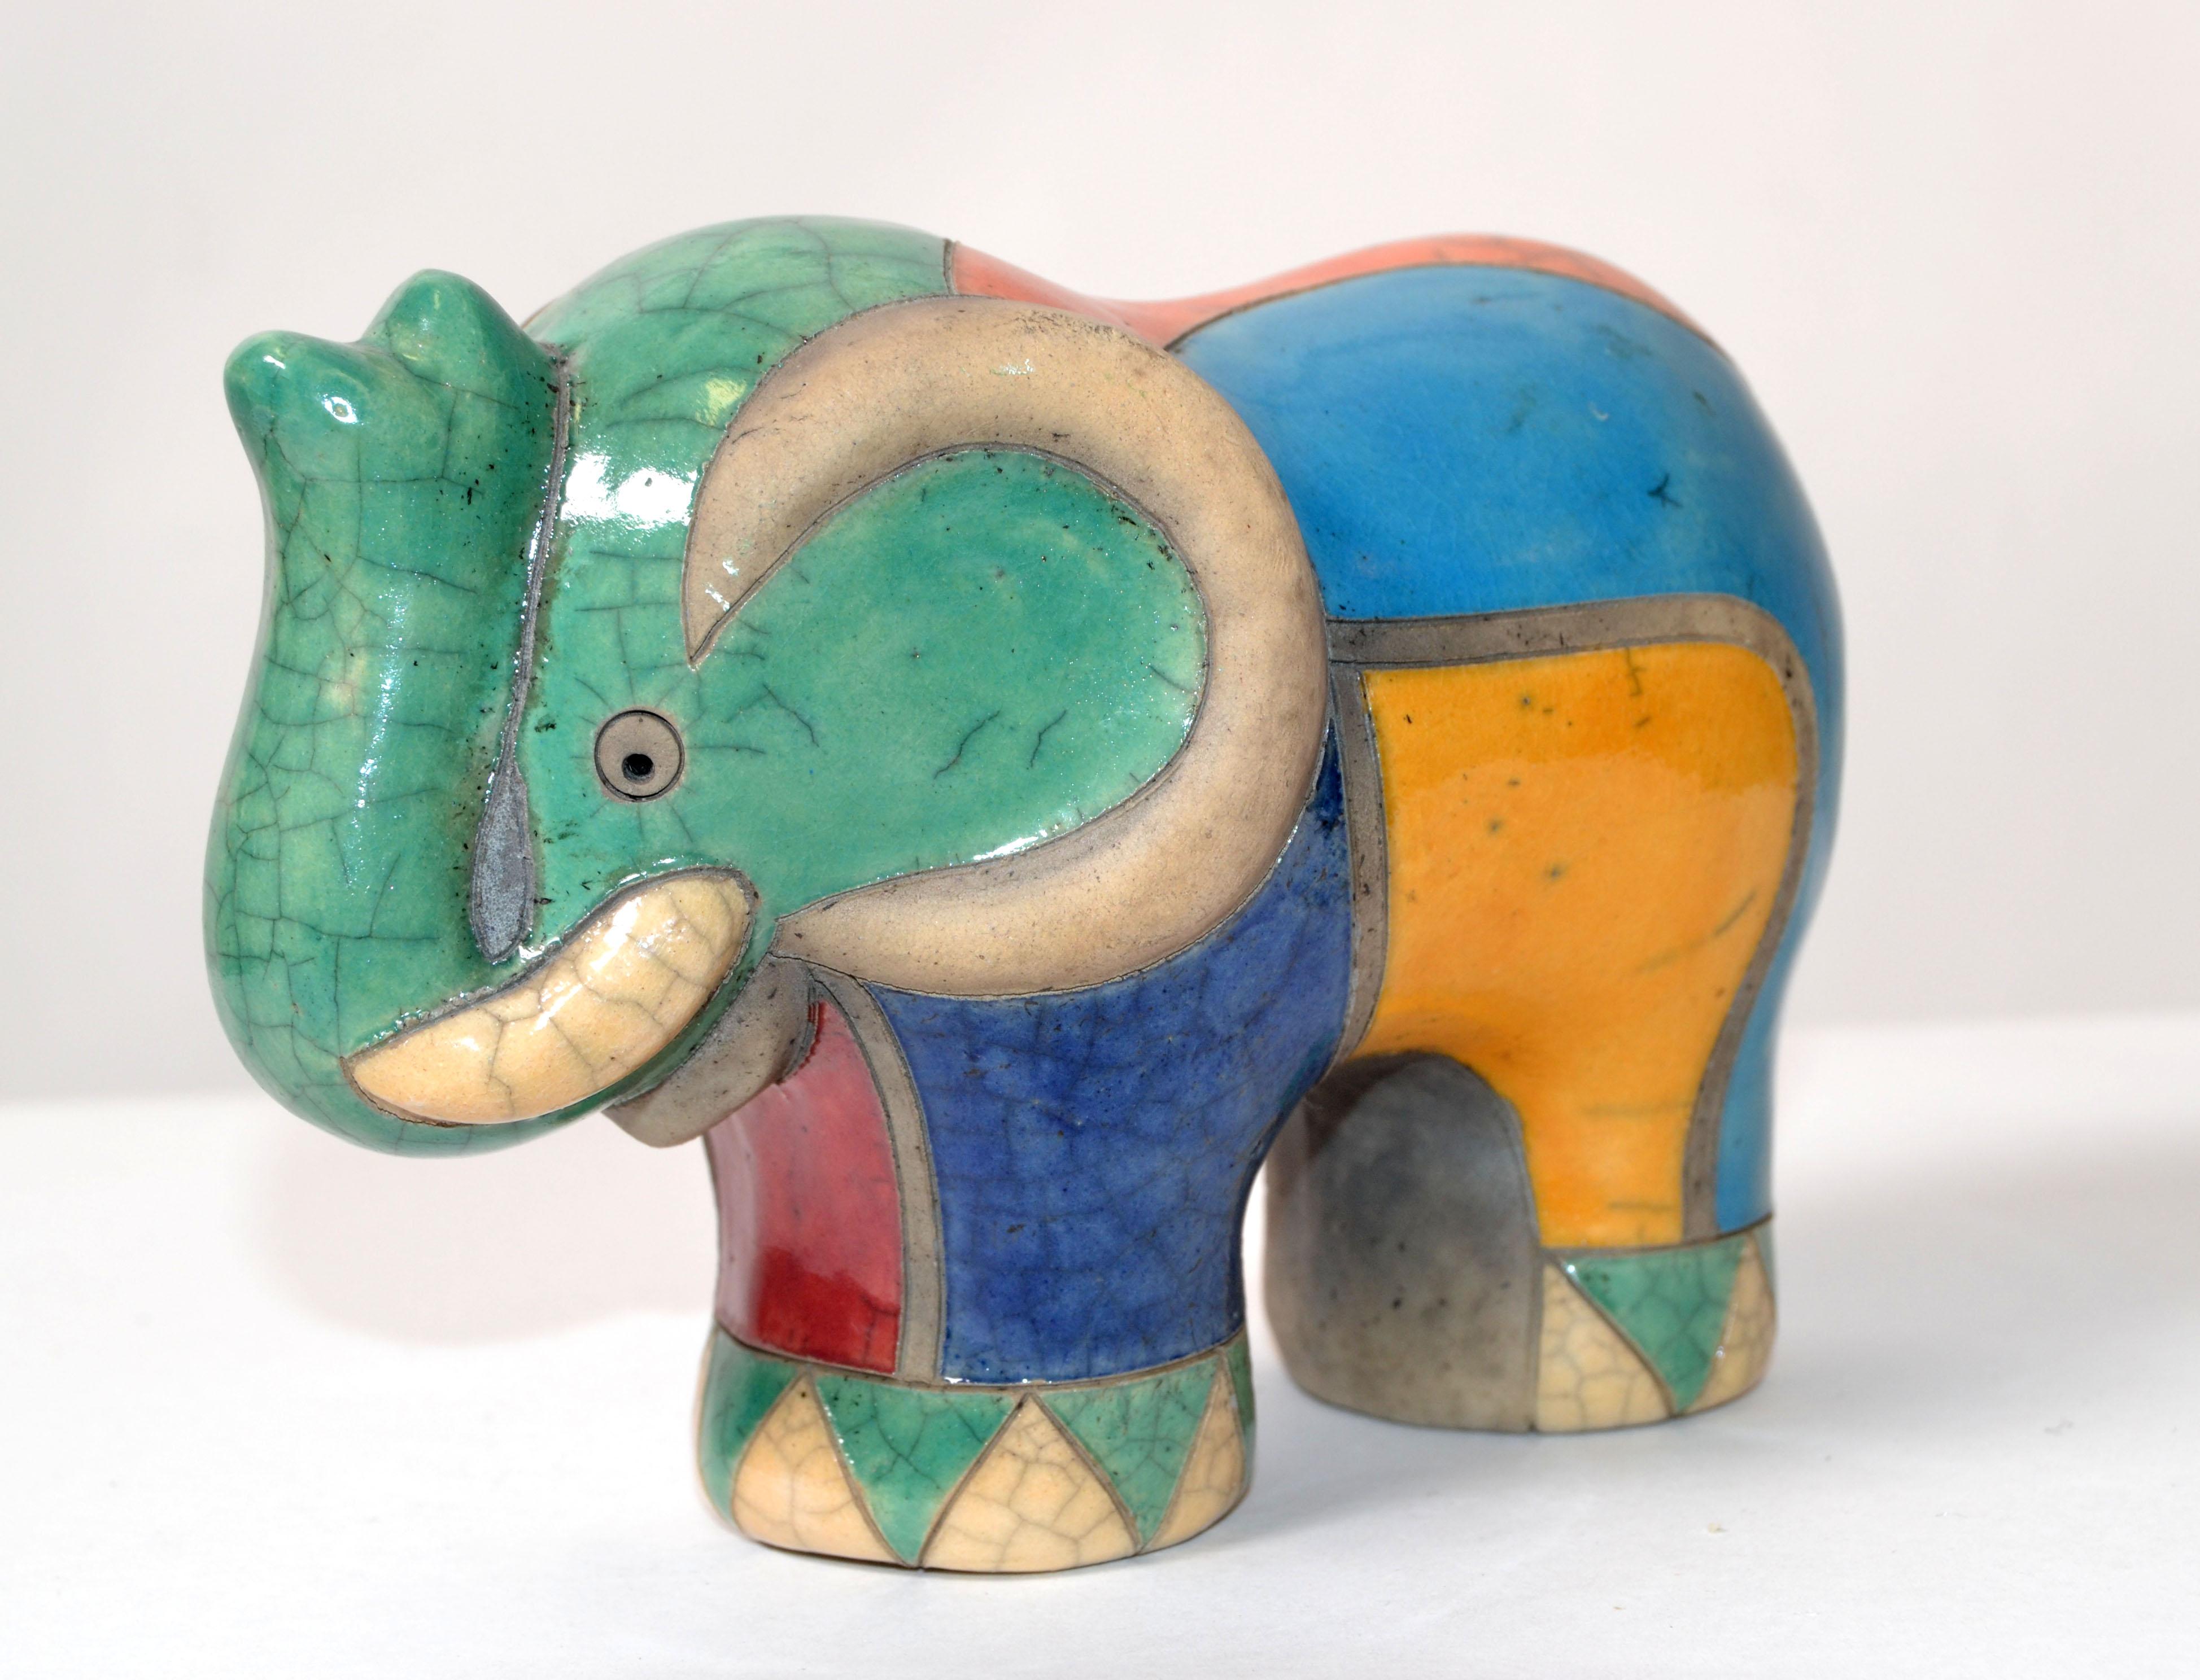 Luca CL Marked colorful ceramic elephant sculpture Mid-Century Modern Italy 1970.
Marked at the Base. CL Luca.
Beautifully handcrafted animal sculpture.